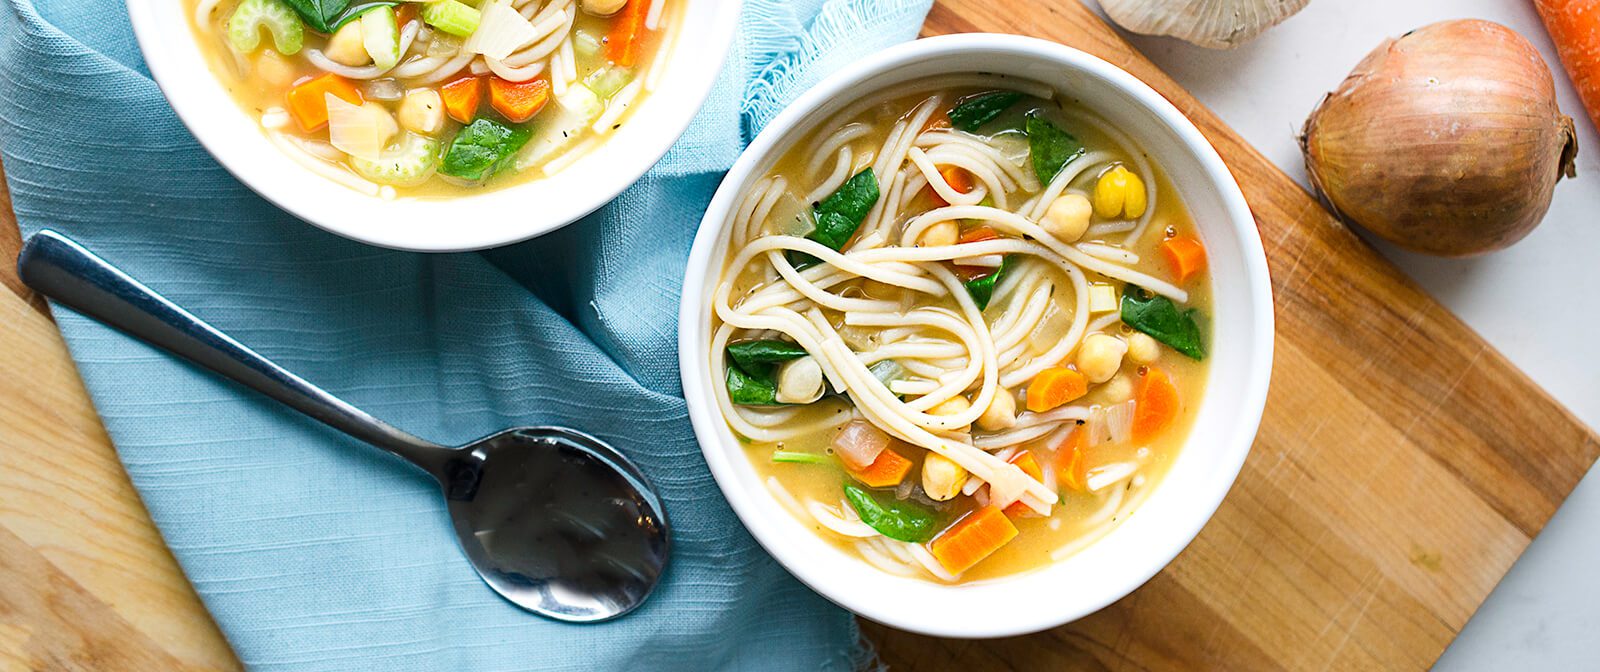 30-Minute Vegan Chickpea Noodle Soup with Spinach Recipe